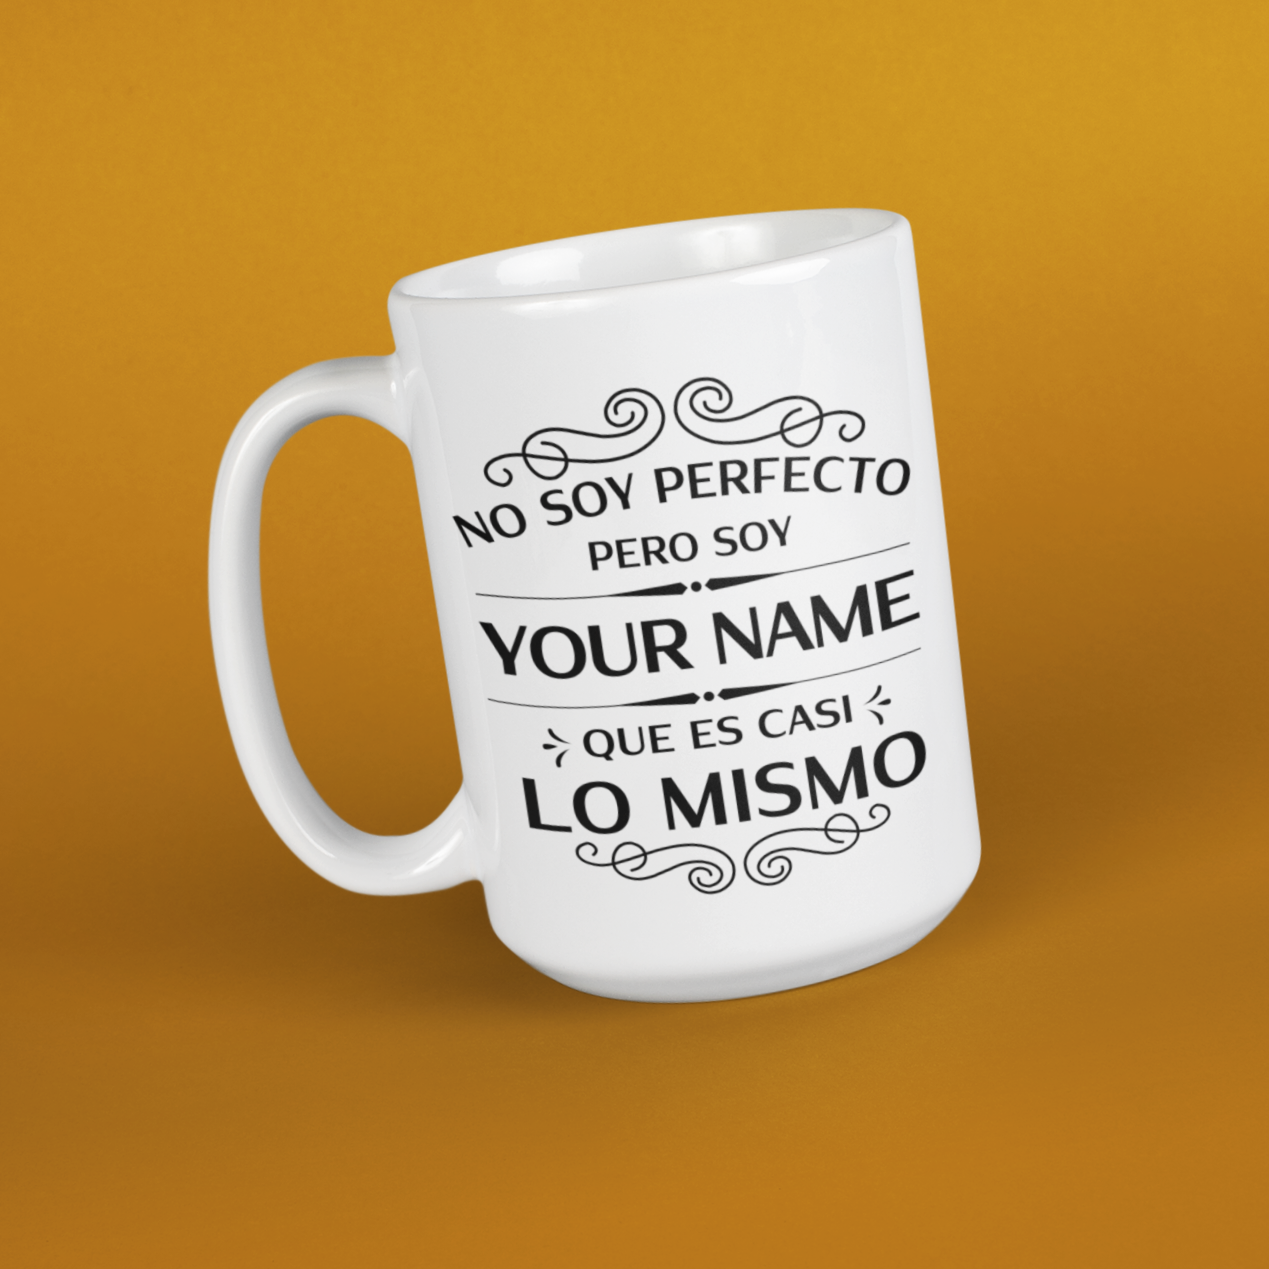 angled version of a Tall white mug for Latinos and Spanish speakers. The mug can be personalized to add someones last name (Apellido). In black lettering, the mug says "no soy perfecto, pero soy 'your name' que es casi lo mismo'